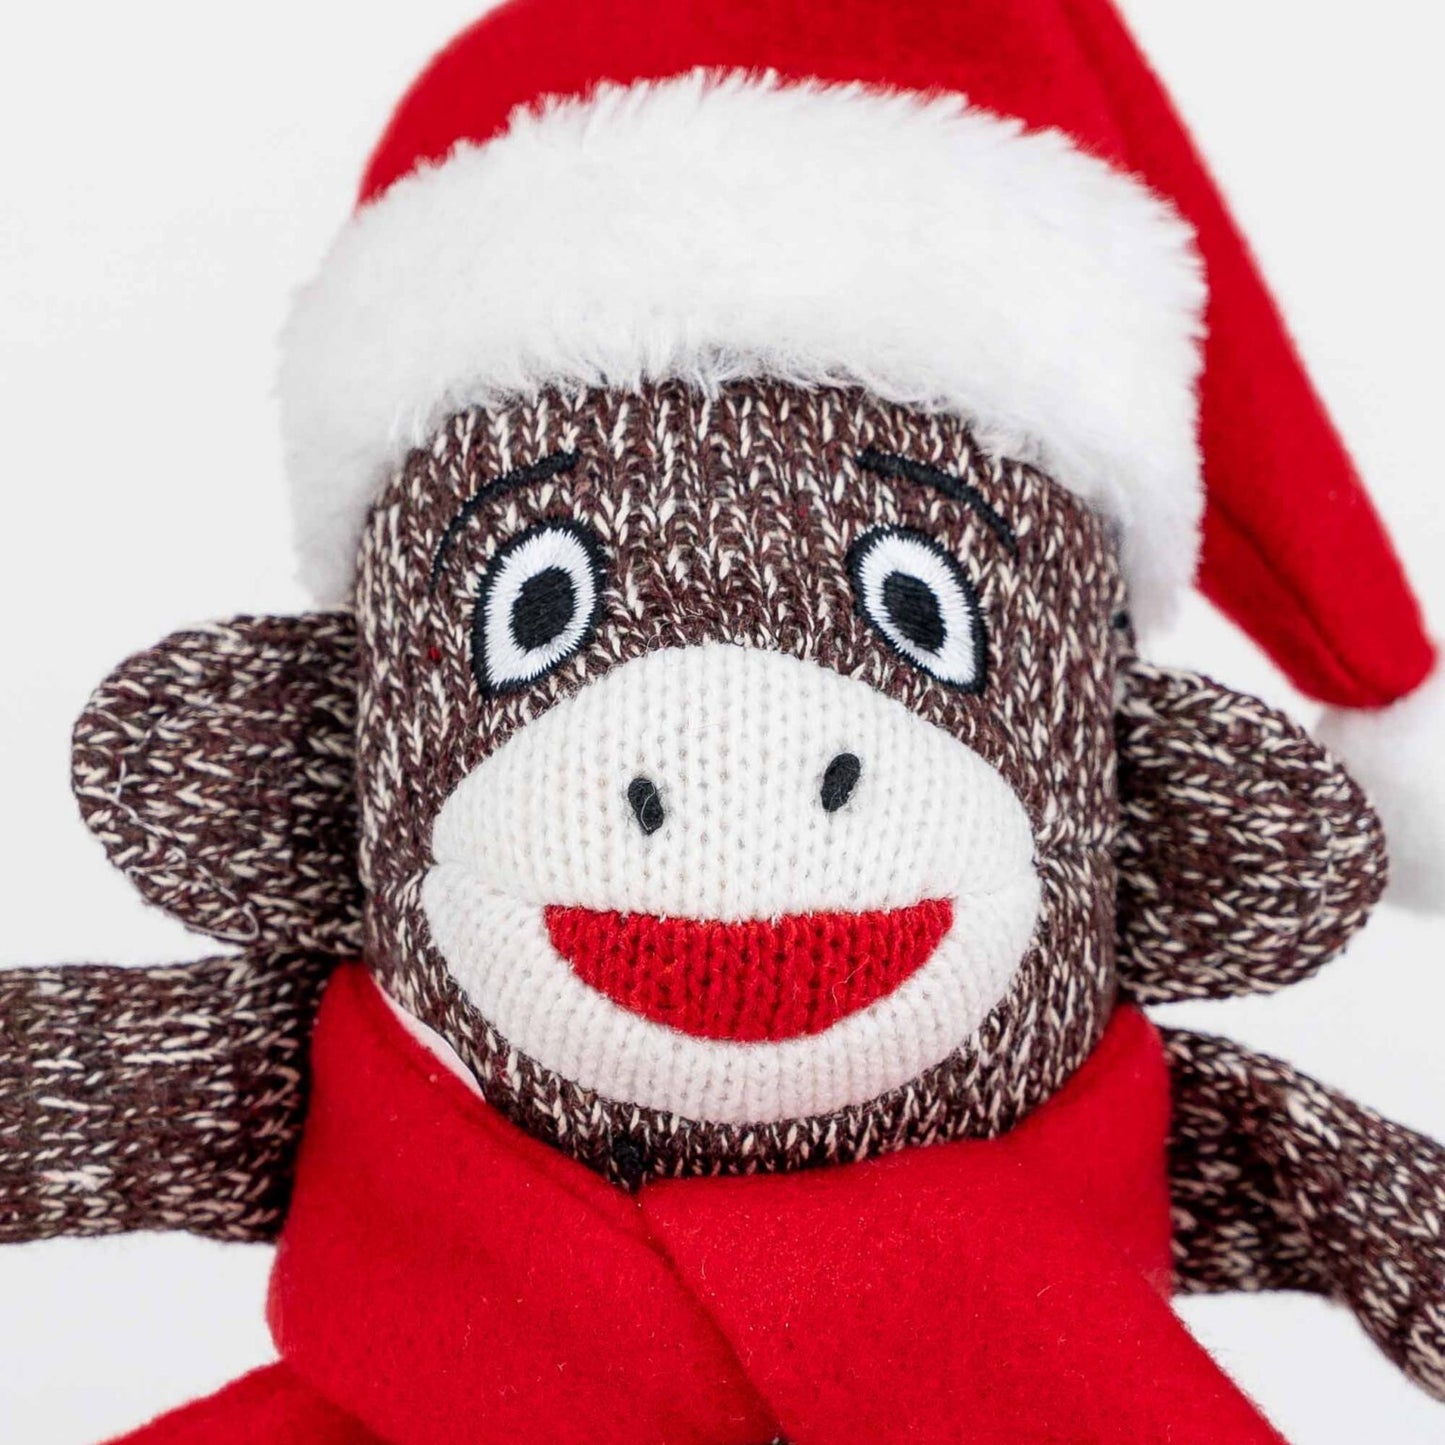 Your Dog’s Very Own Christmas Santa Sock Monkey Toy - Collectable Nostalgic Dog Toy